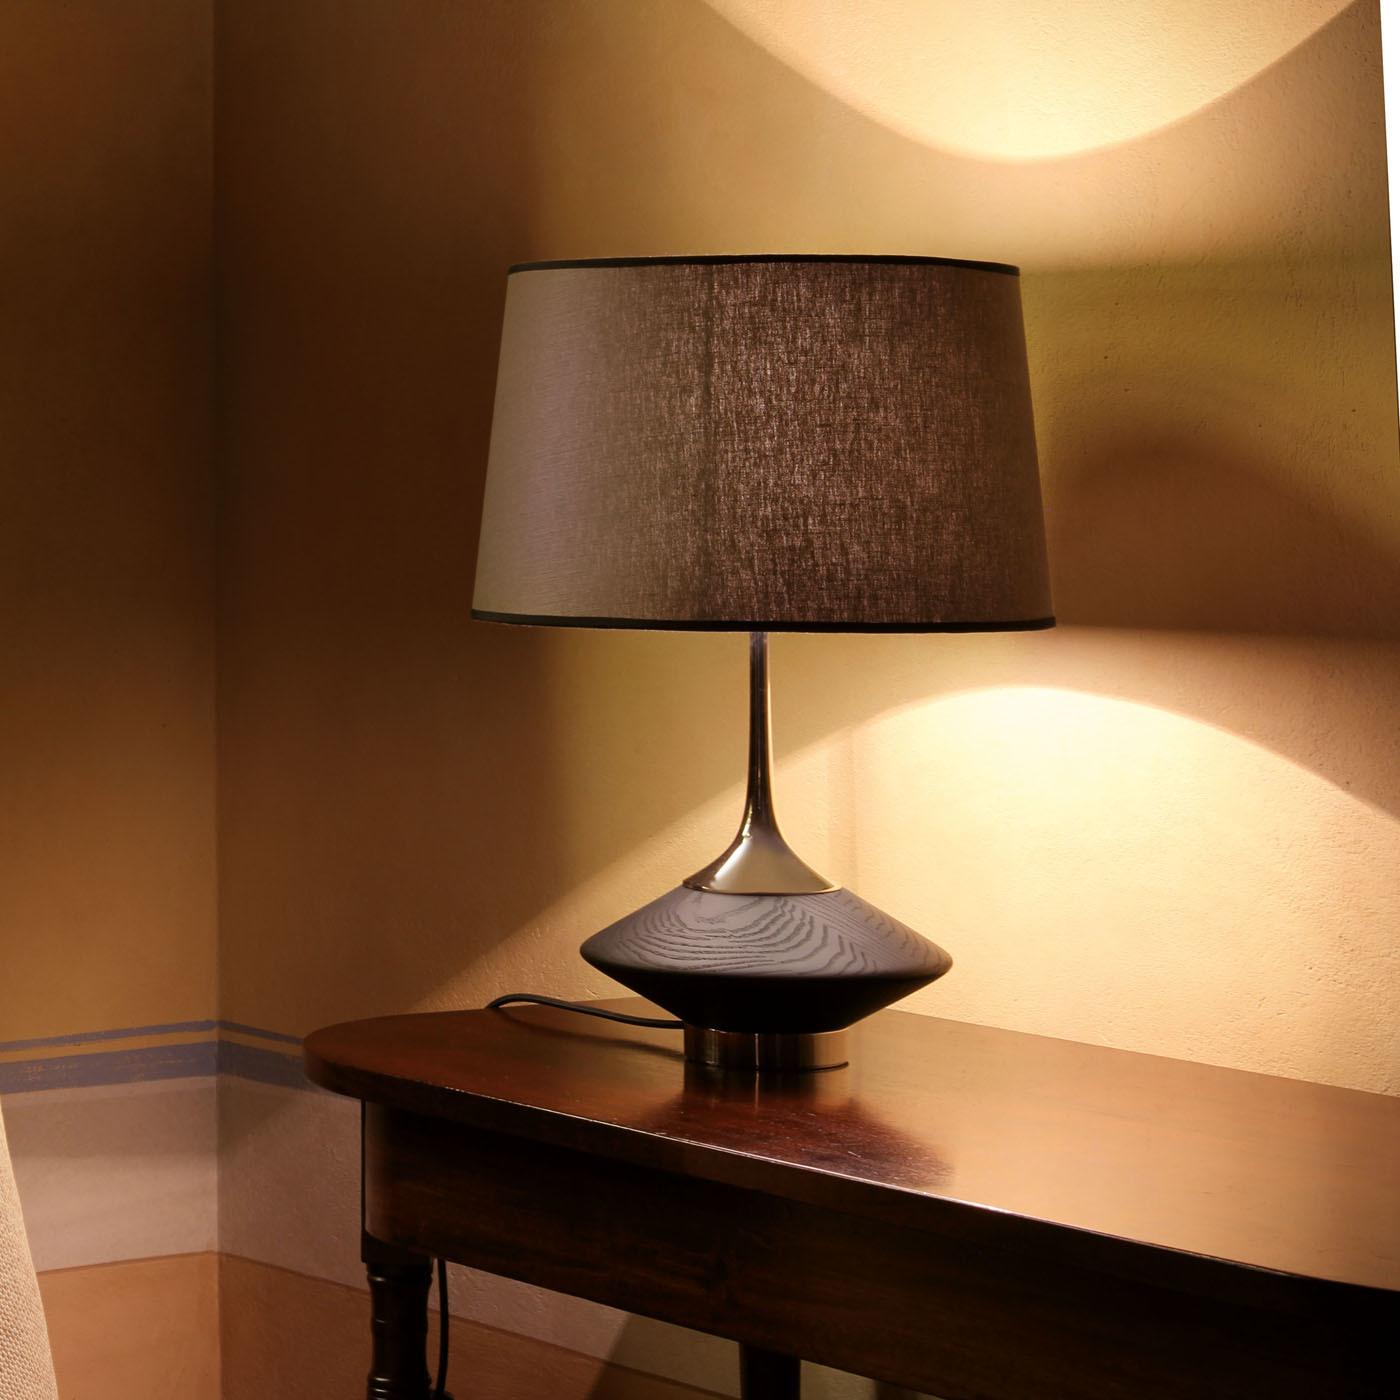 The Vuvu wood table lamp is a celebration of natural wood, with veins, cracks and holes ensuring that no two pieces are exactly alike. The stem and base of the lamp are crafted in brass with a polished nickel finish and topped with a linen shade,